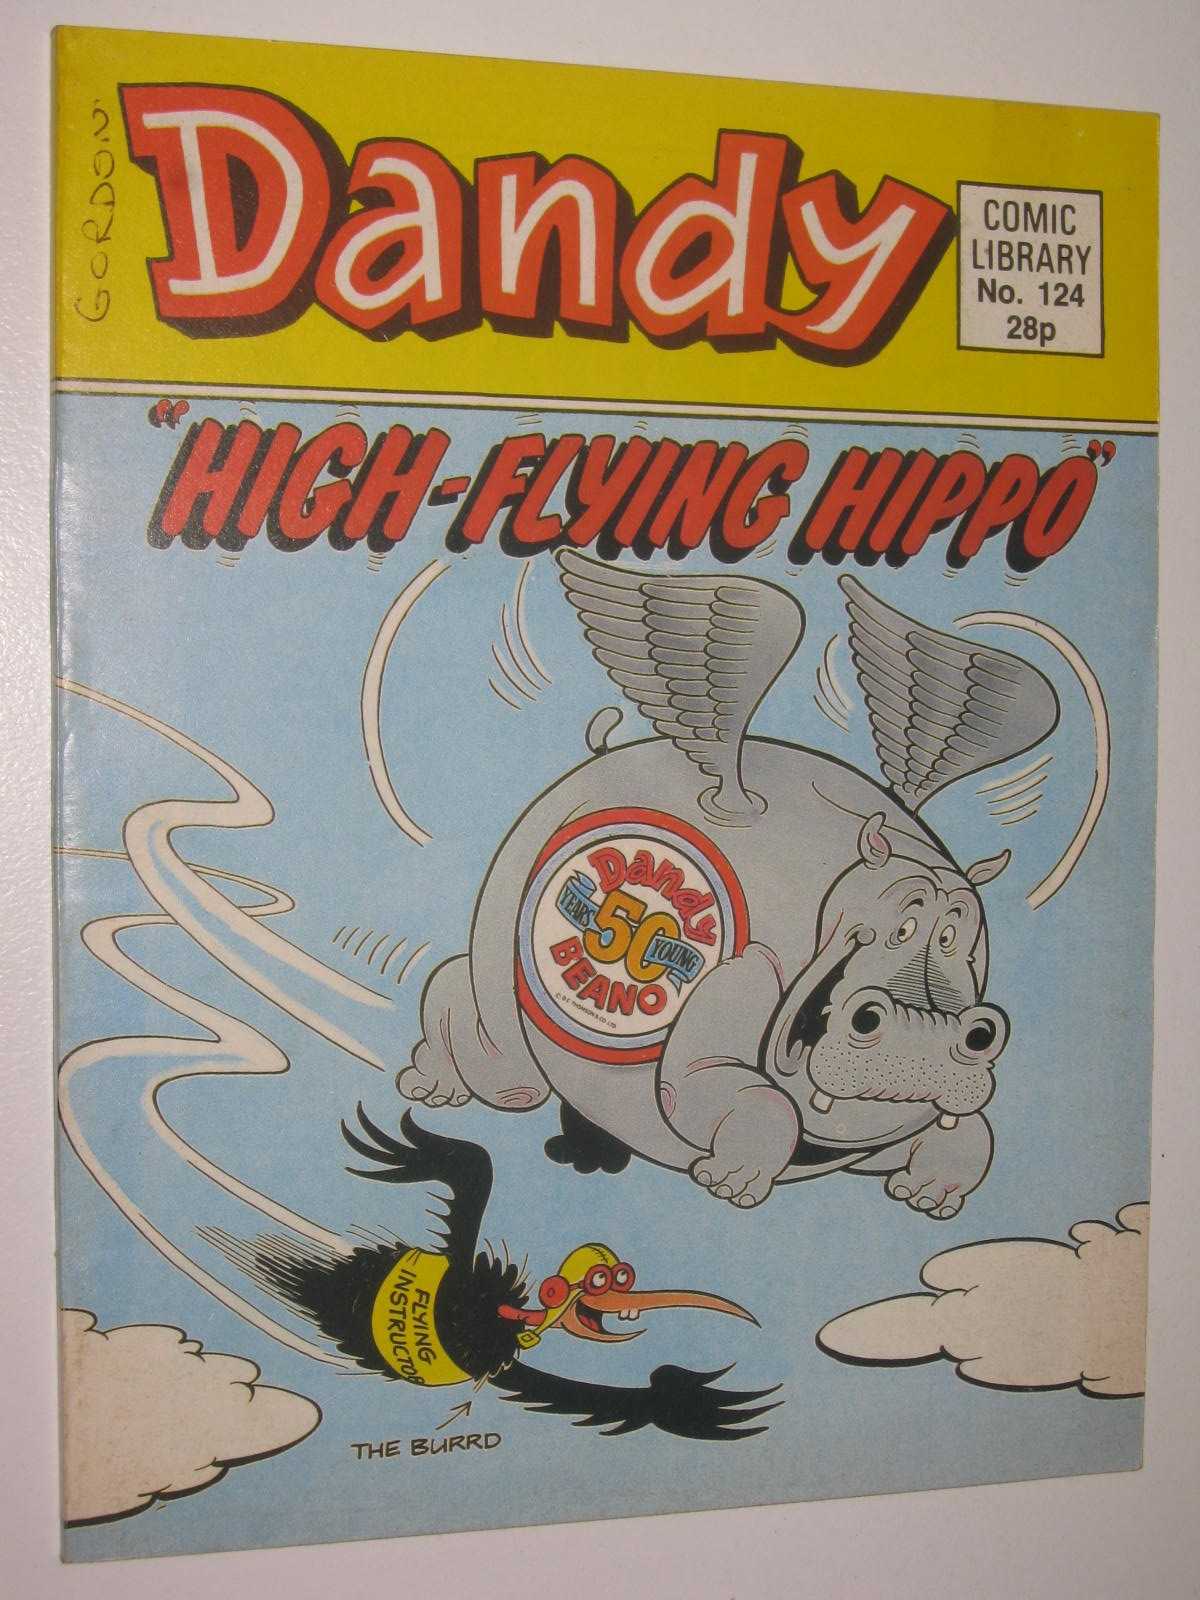 Image for "High-Flying Hippo" - Dandy Comic Library #124